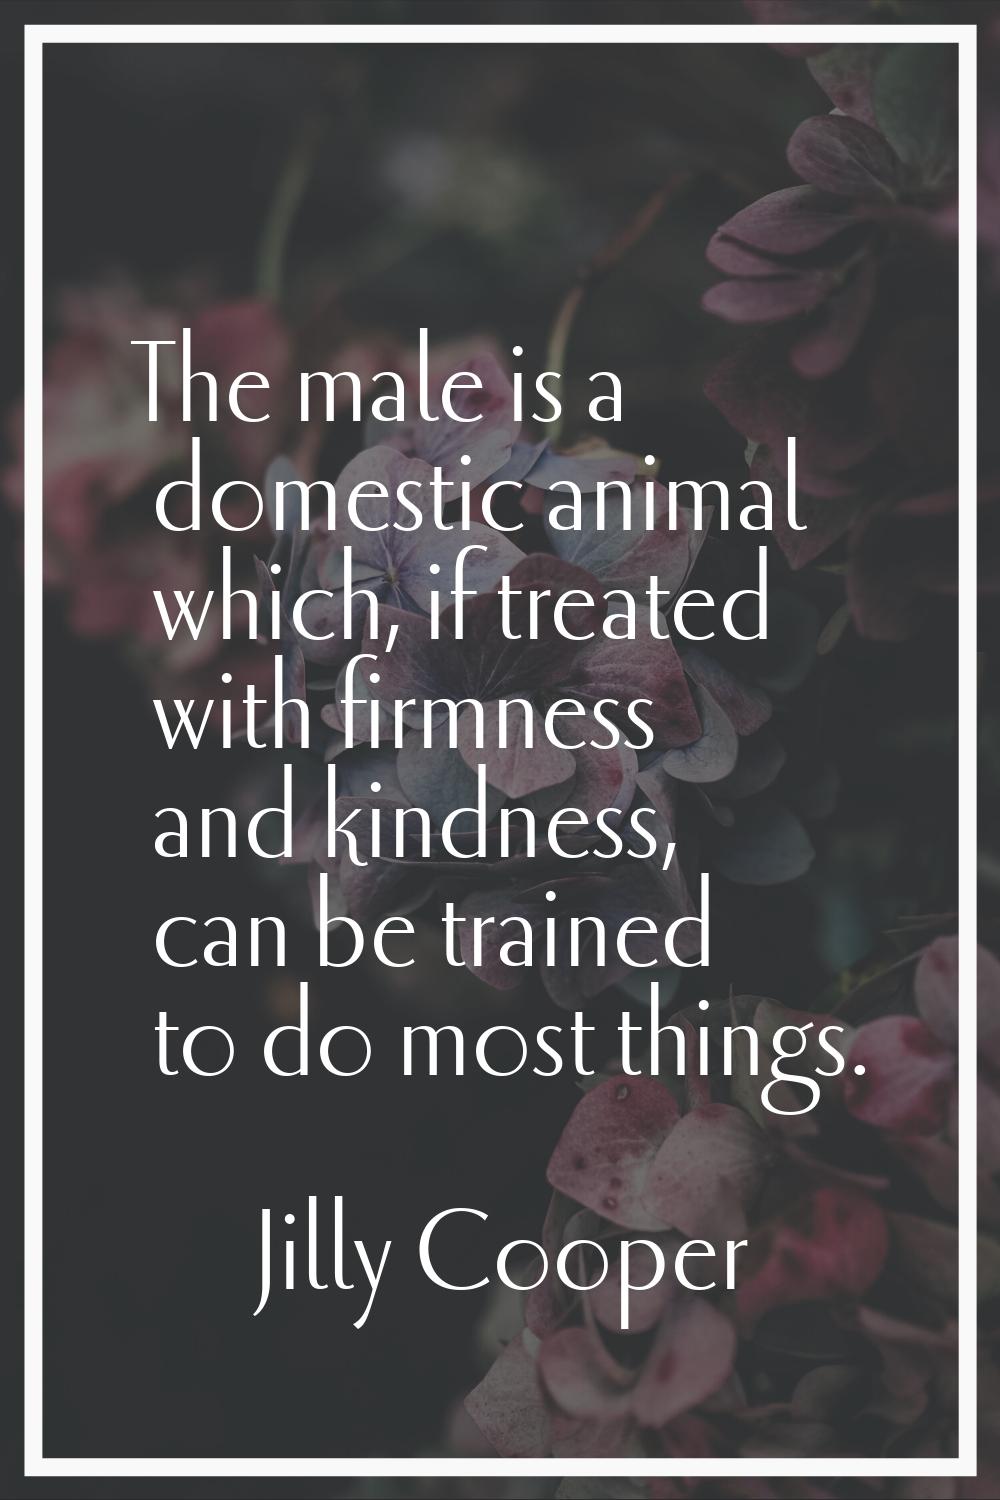 The male is a domestic animal which, if treated with firmness and kindness, can be trained to do mo